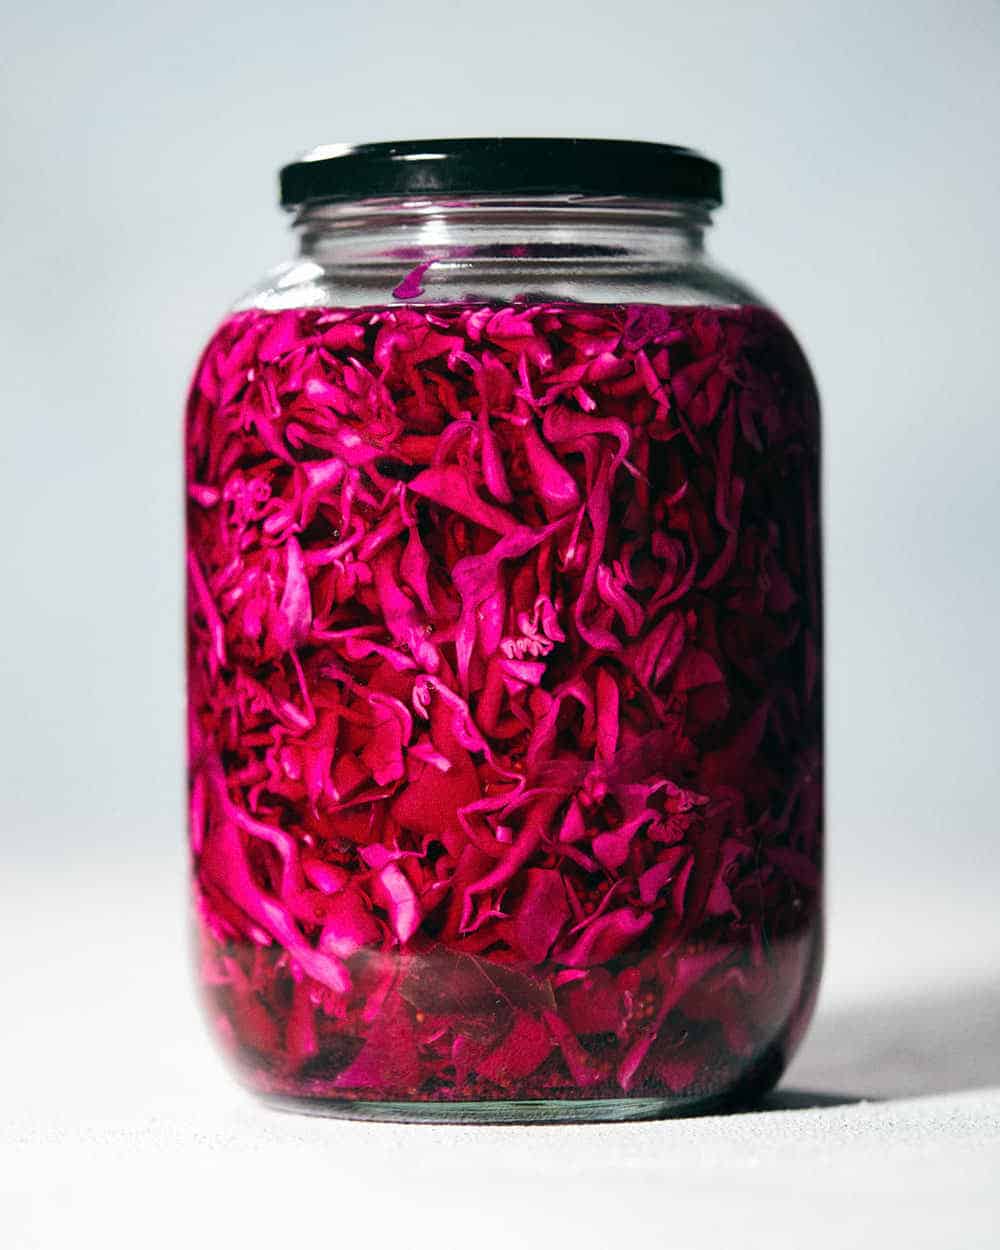 A straight view of pickled red cabbage placed in a jar.